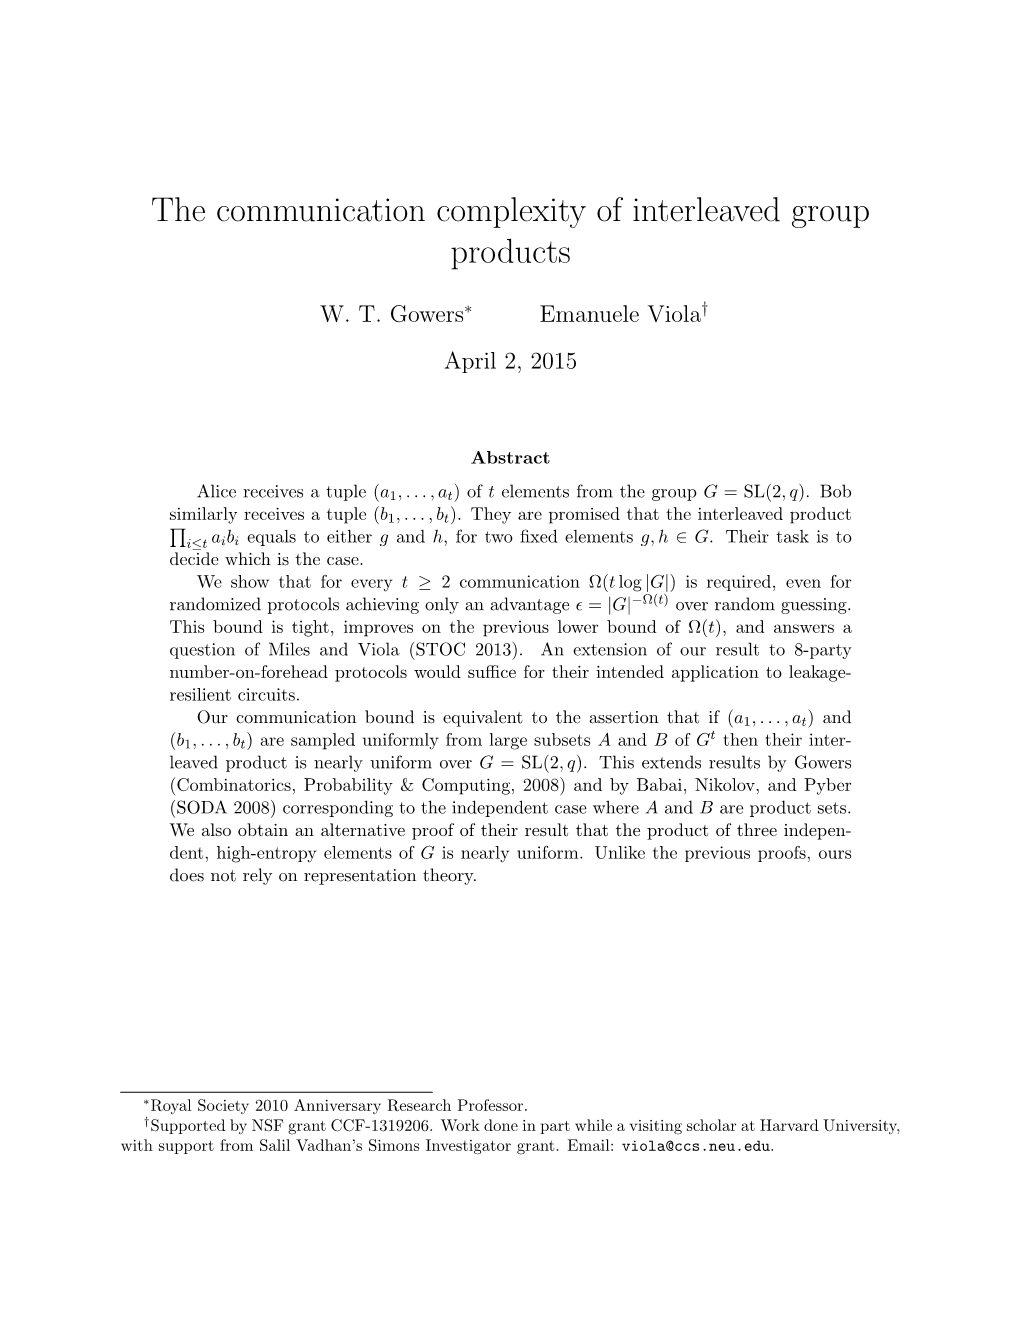 The Communication Complexity of Interleaved Group Products